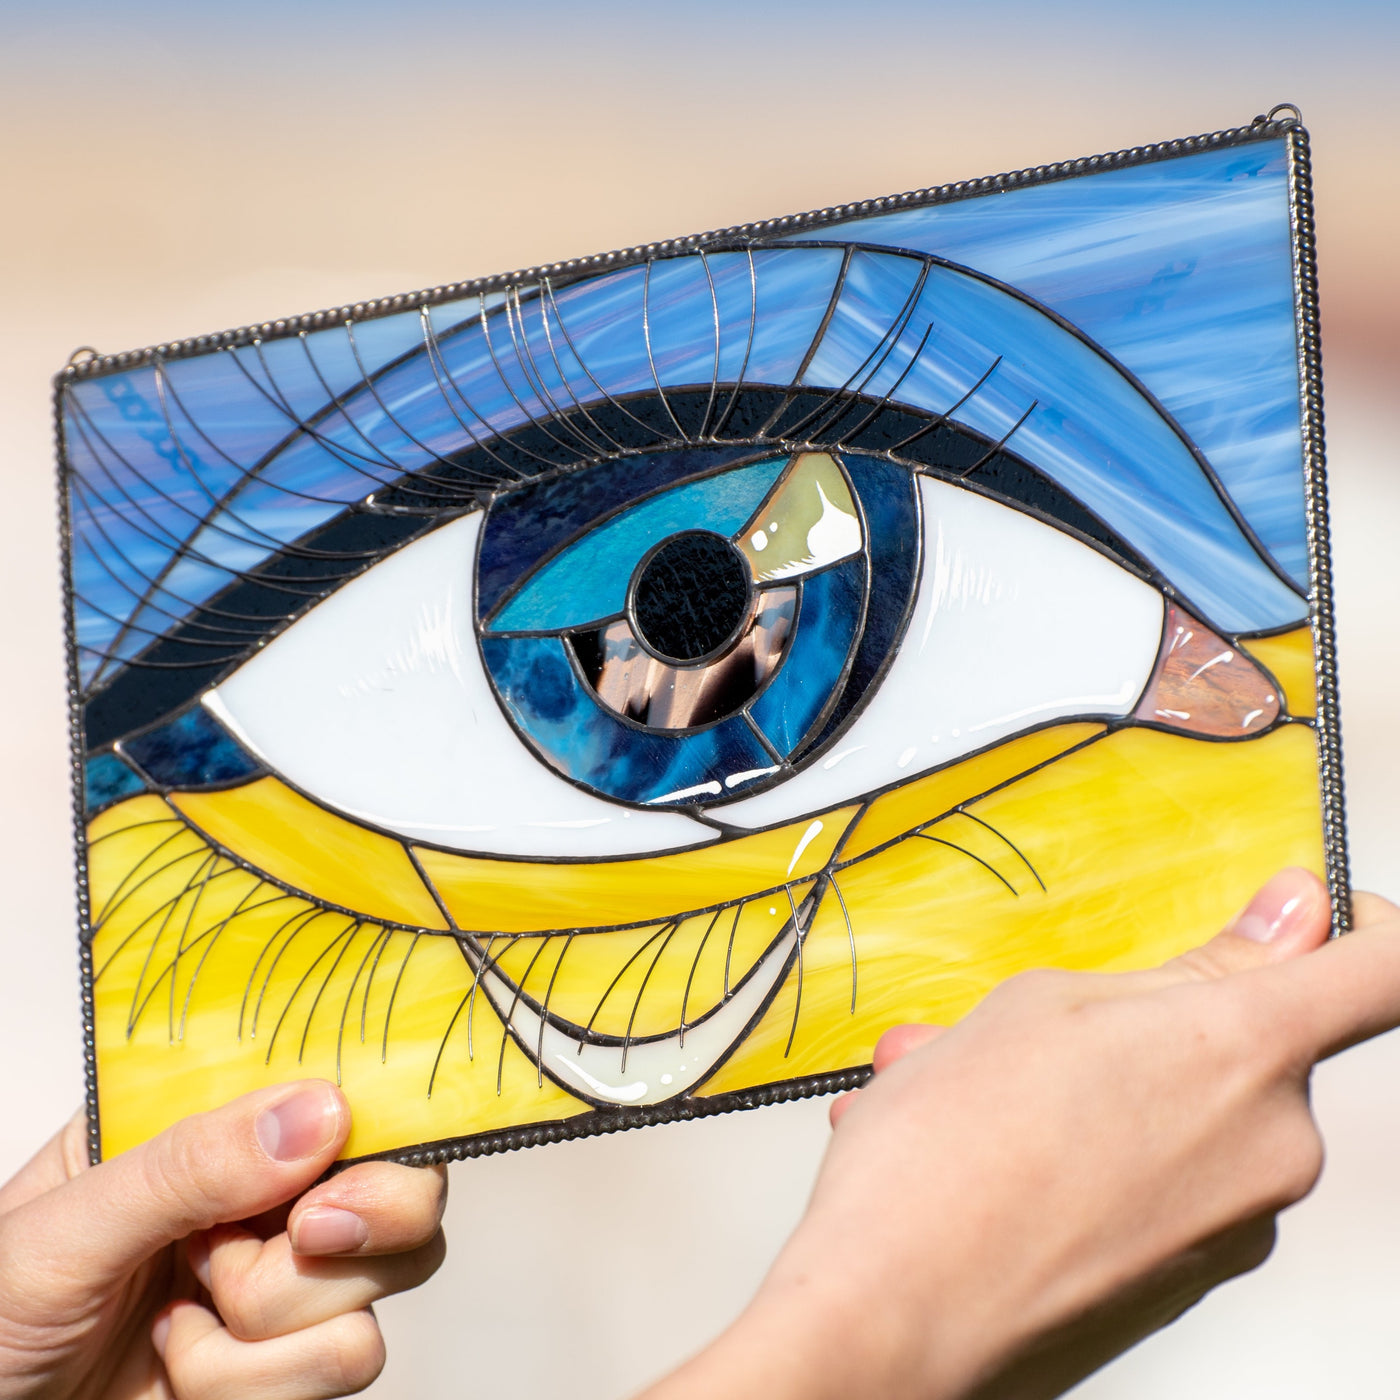 Stained glass Ukrainian flag with the eye in the middle